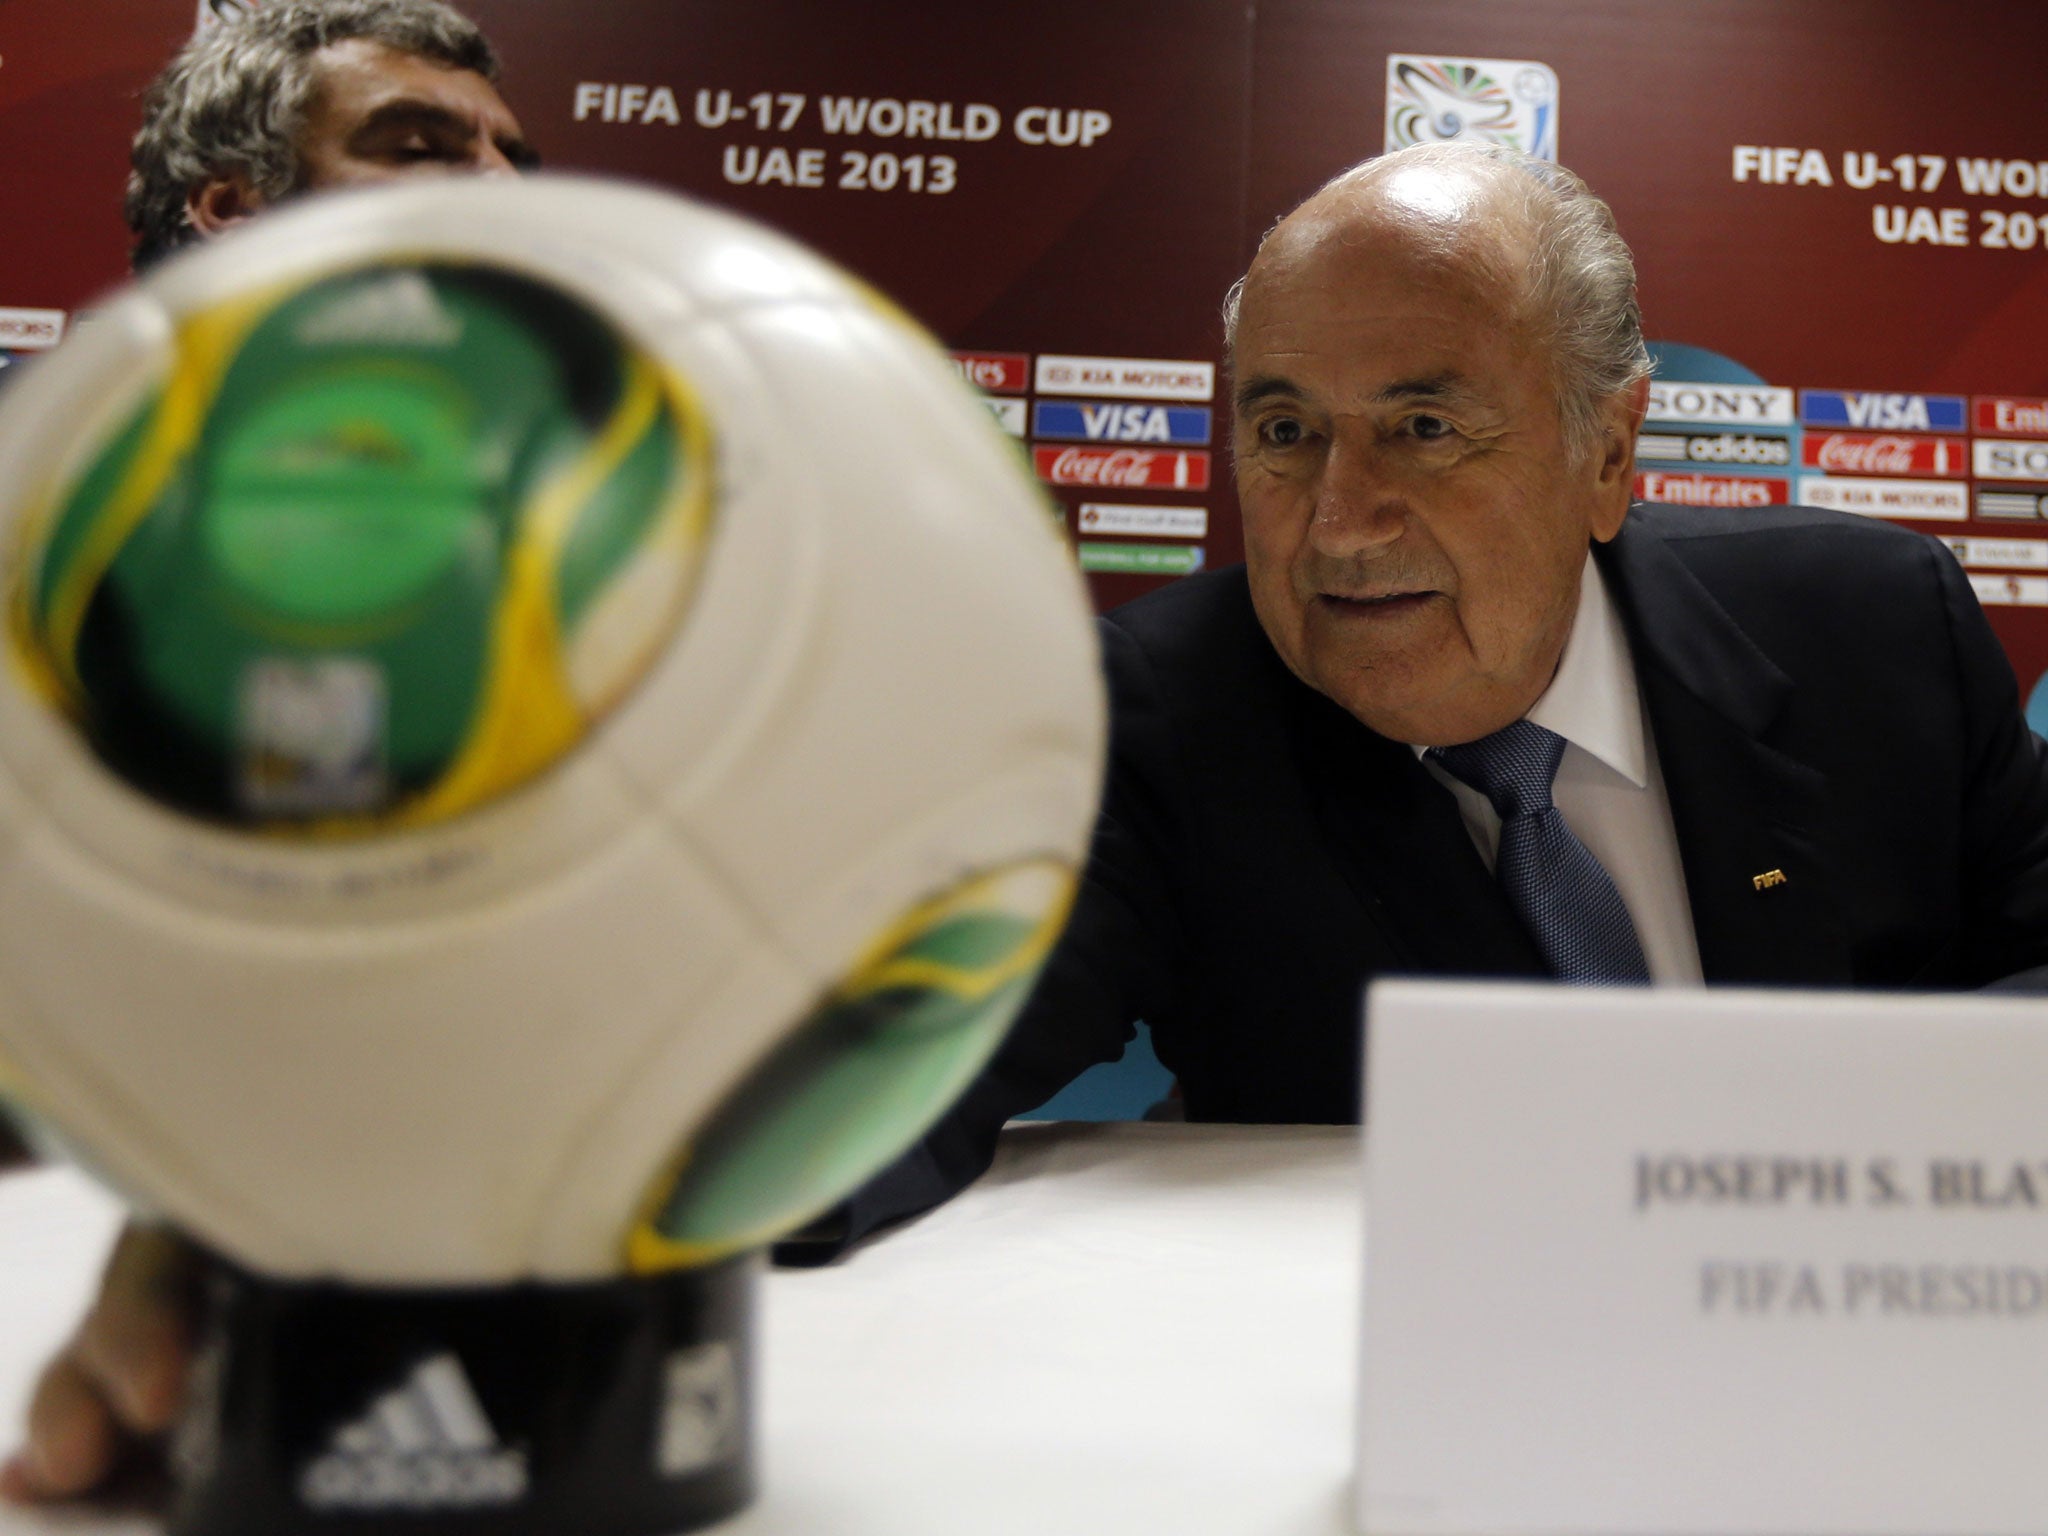 Sepp Blatter has admitted he is open to the possibility of staging the 2022 World Cup in more than one Gulf nation